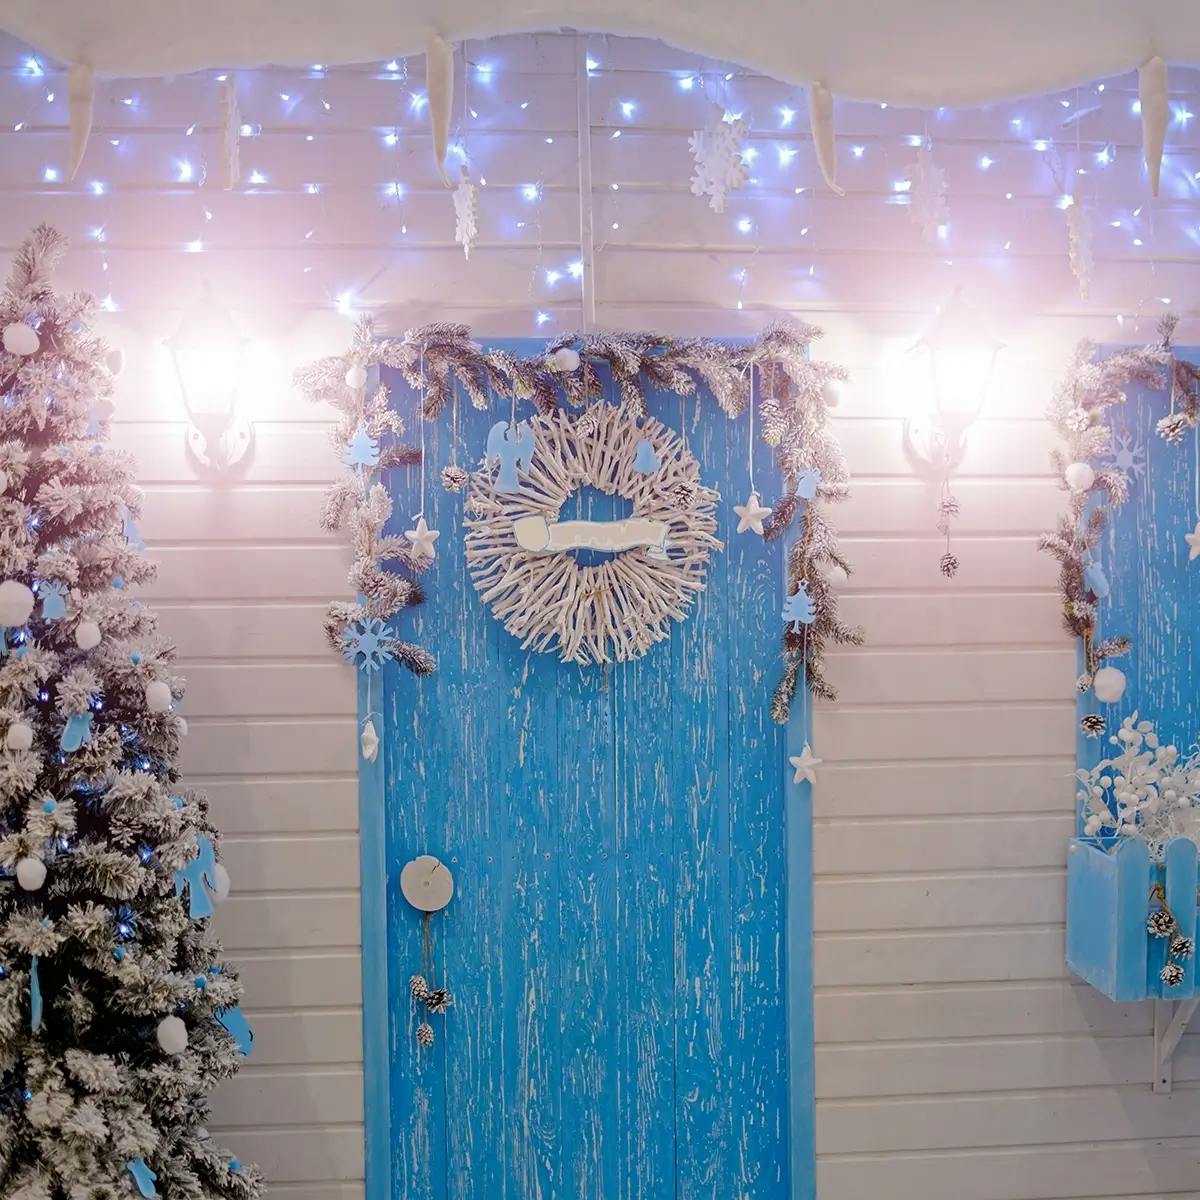 Christmas porch decorations in blue and white.